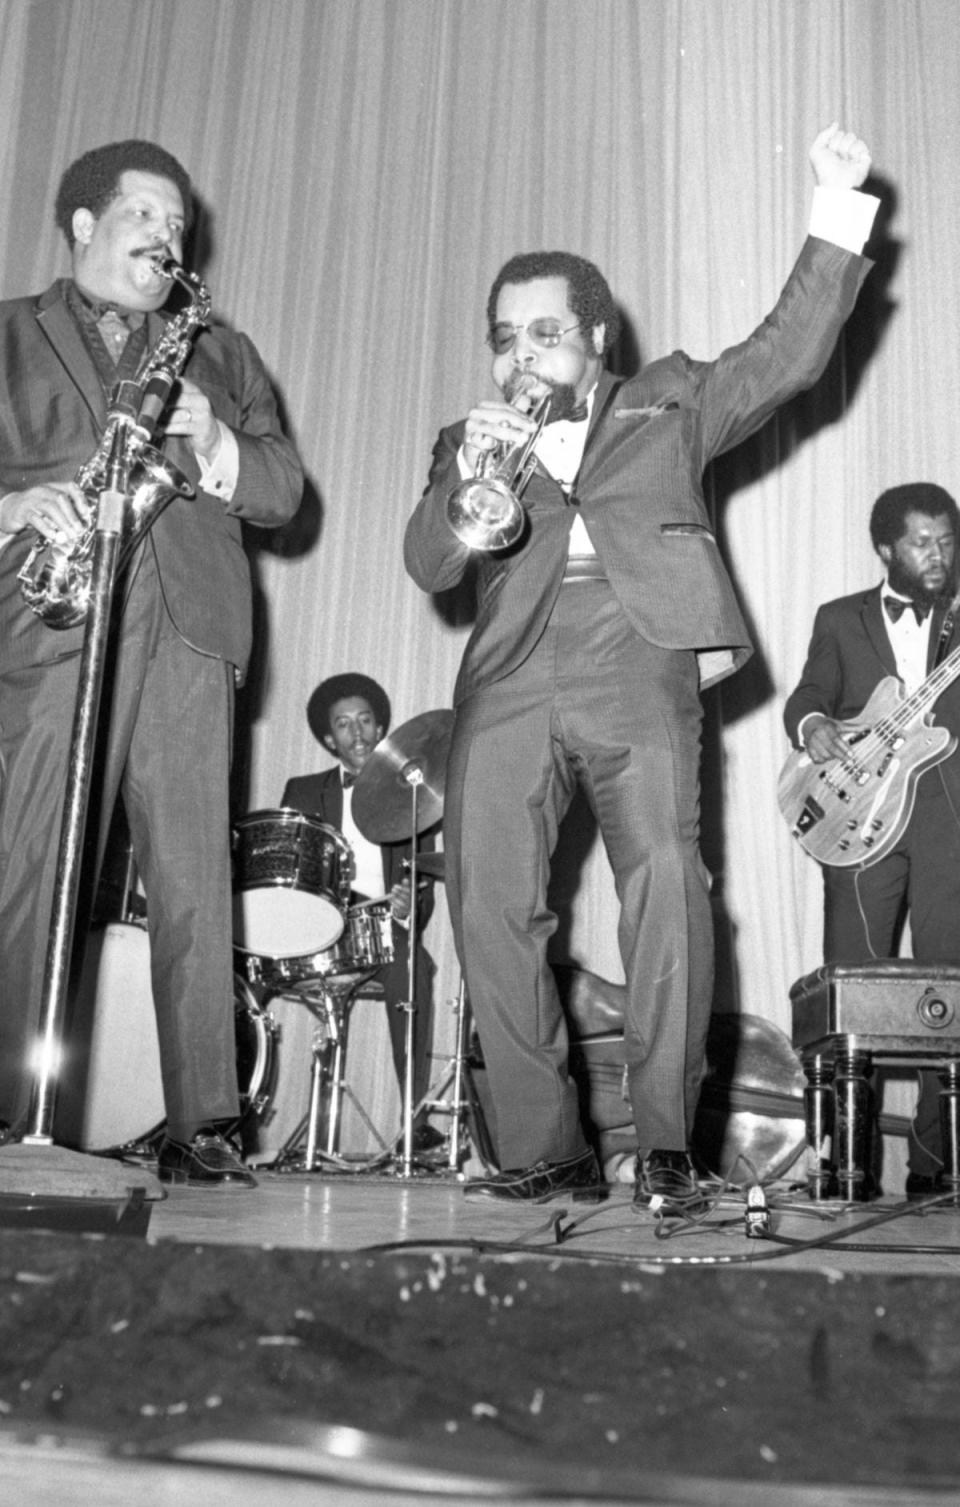 Cannonball, left, and Nat Adderley perform at a 1969 Florida A&M University concert
(Credit: State Archives of Florida)